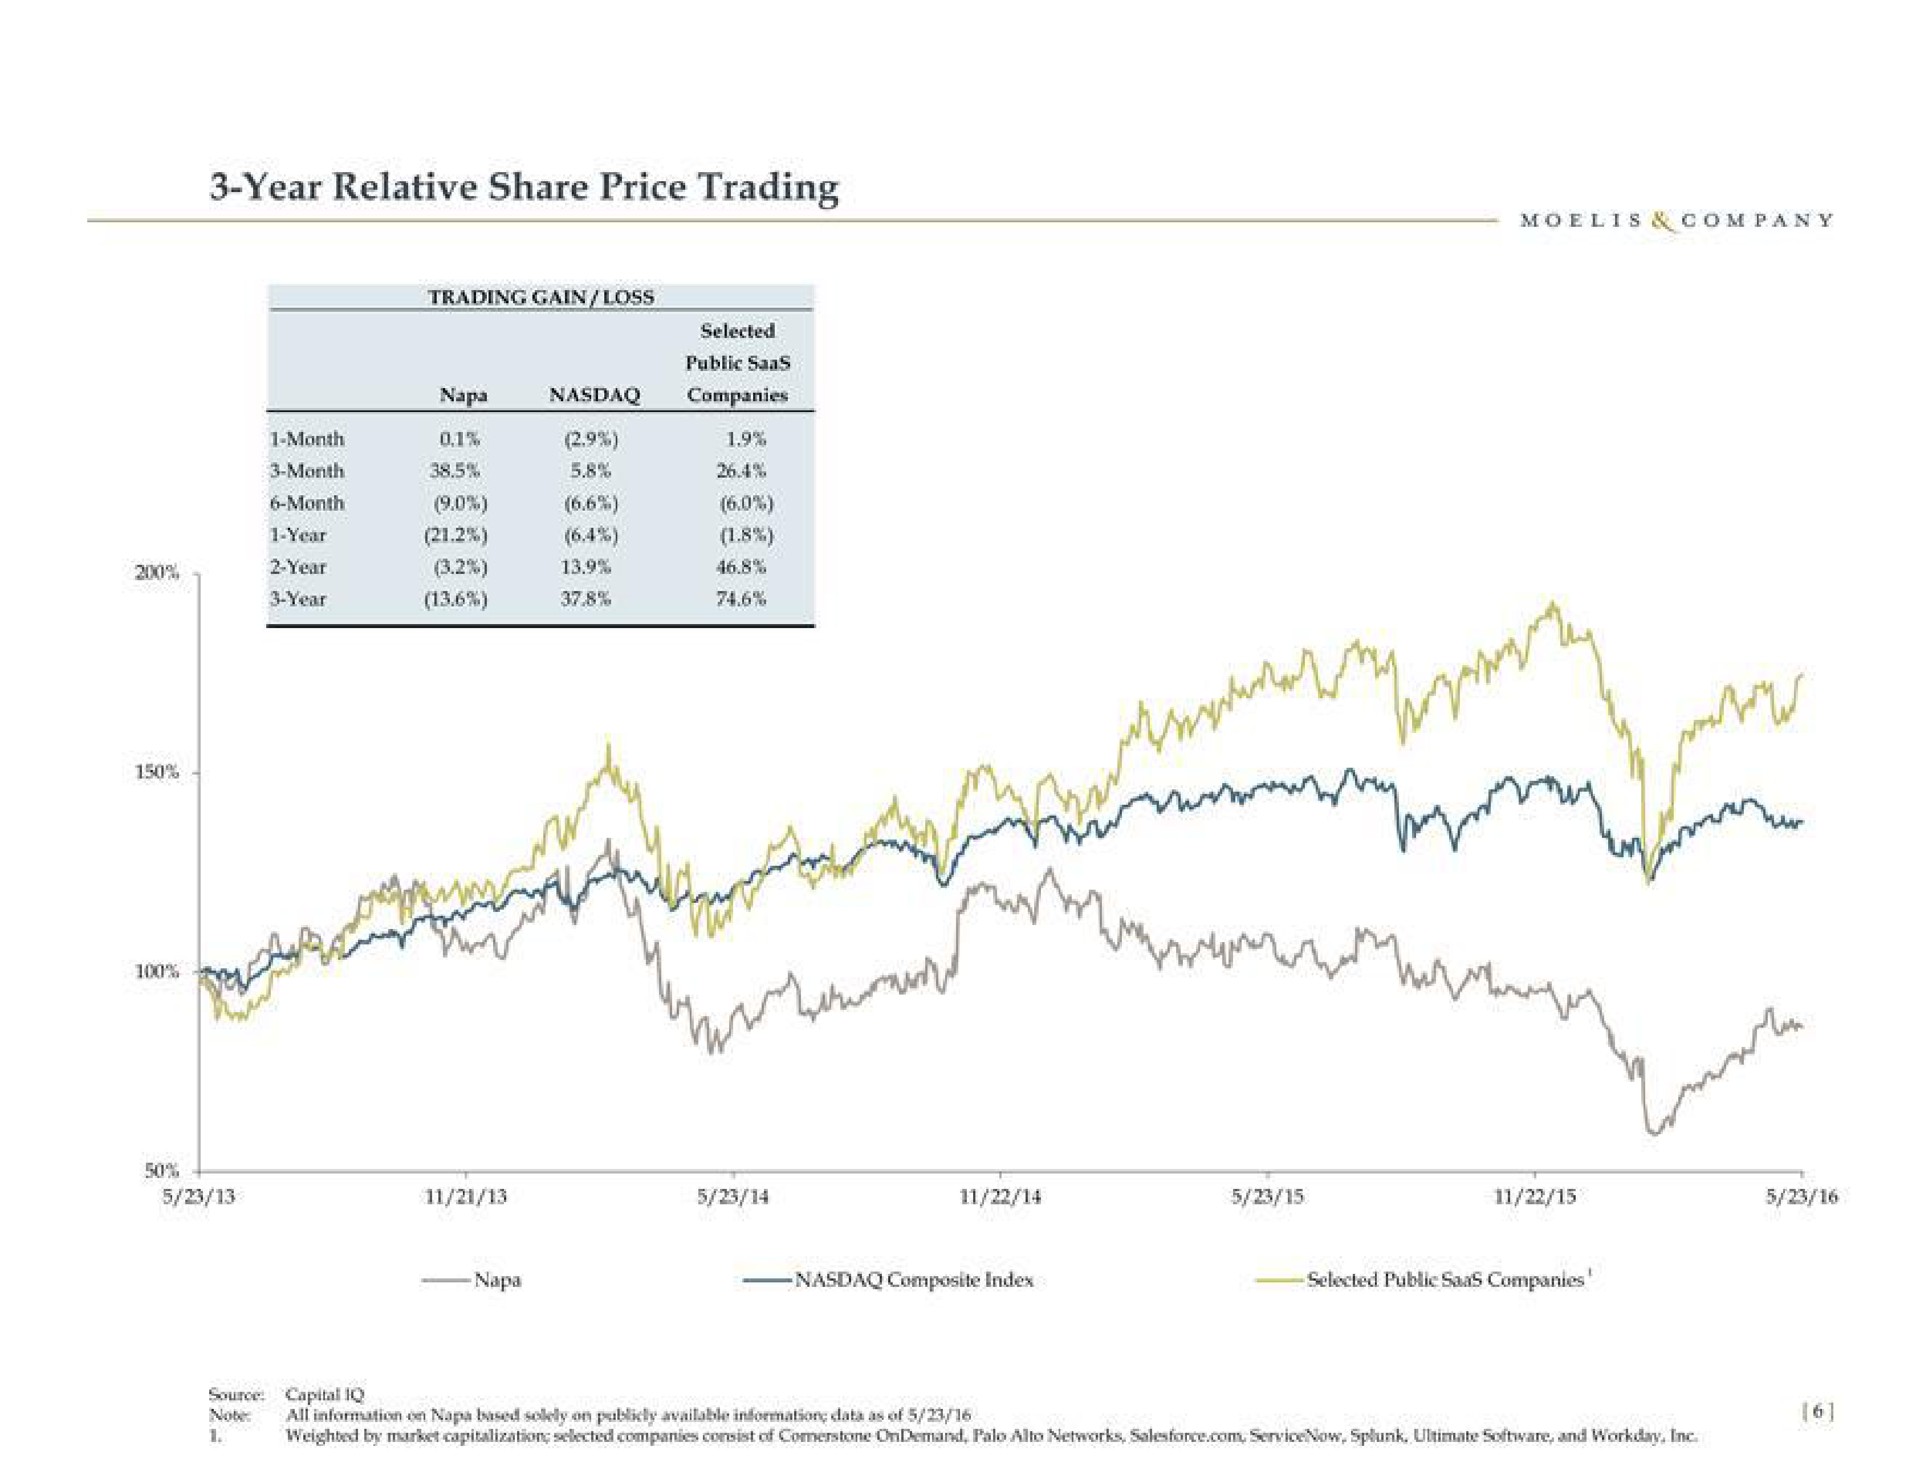 year relative share price trading per tal i | Moelis & Company